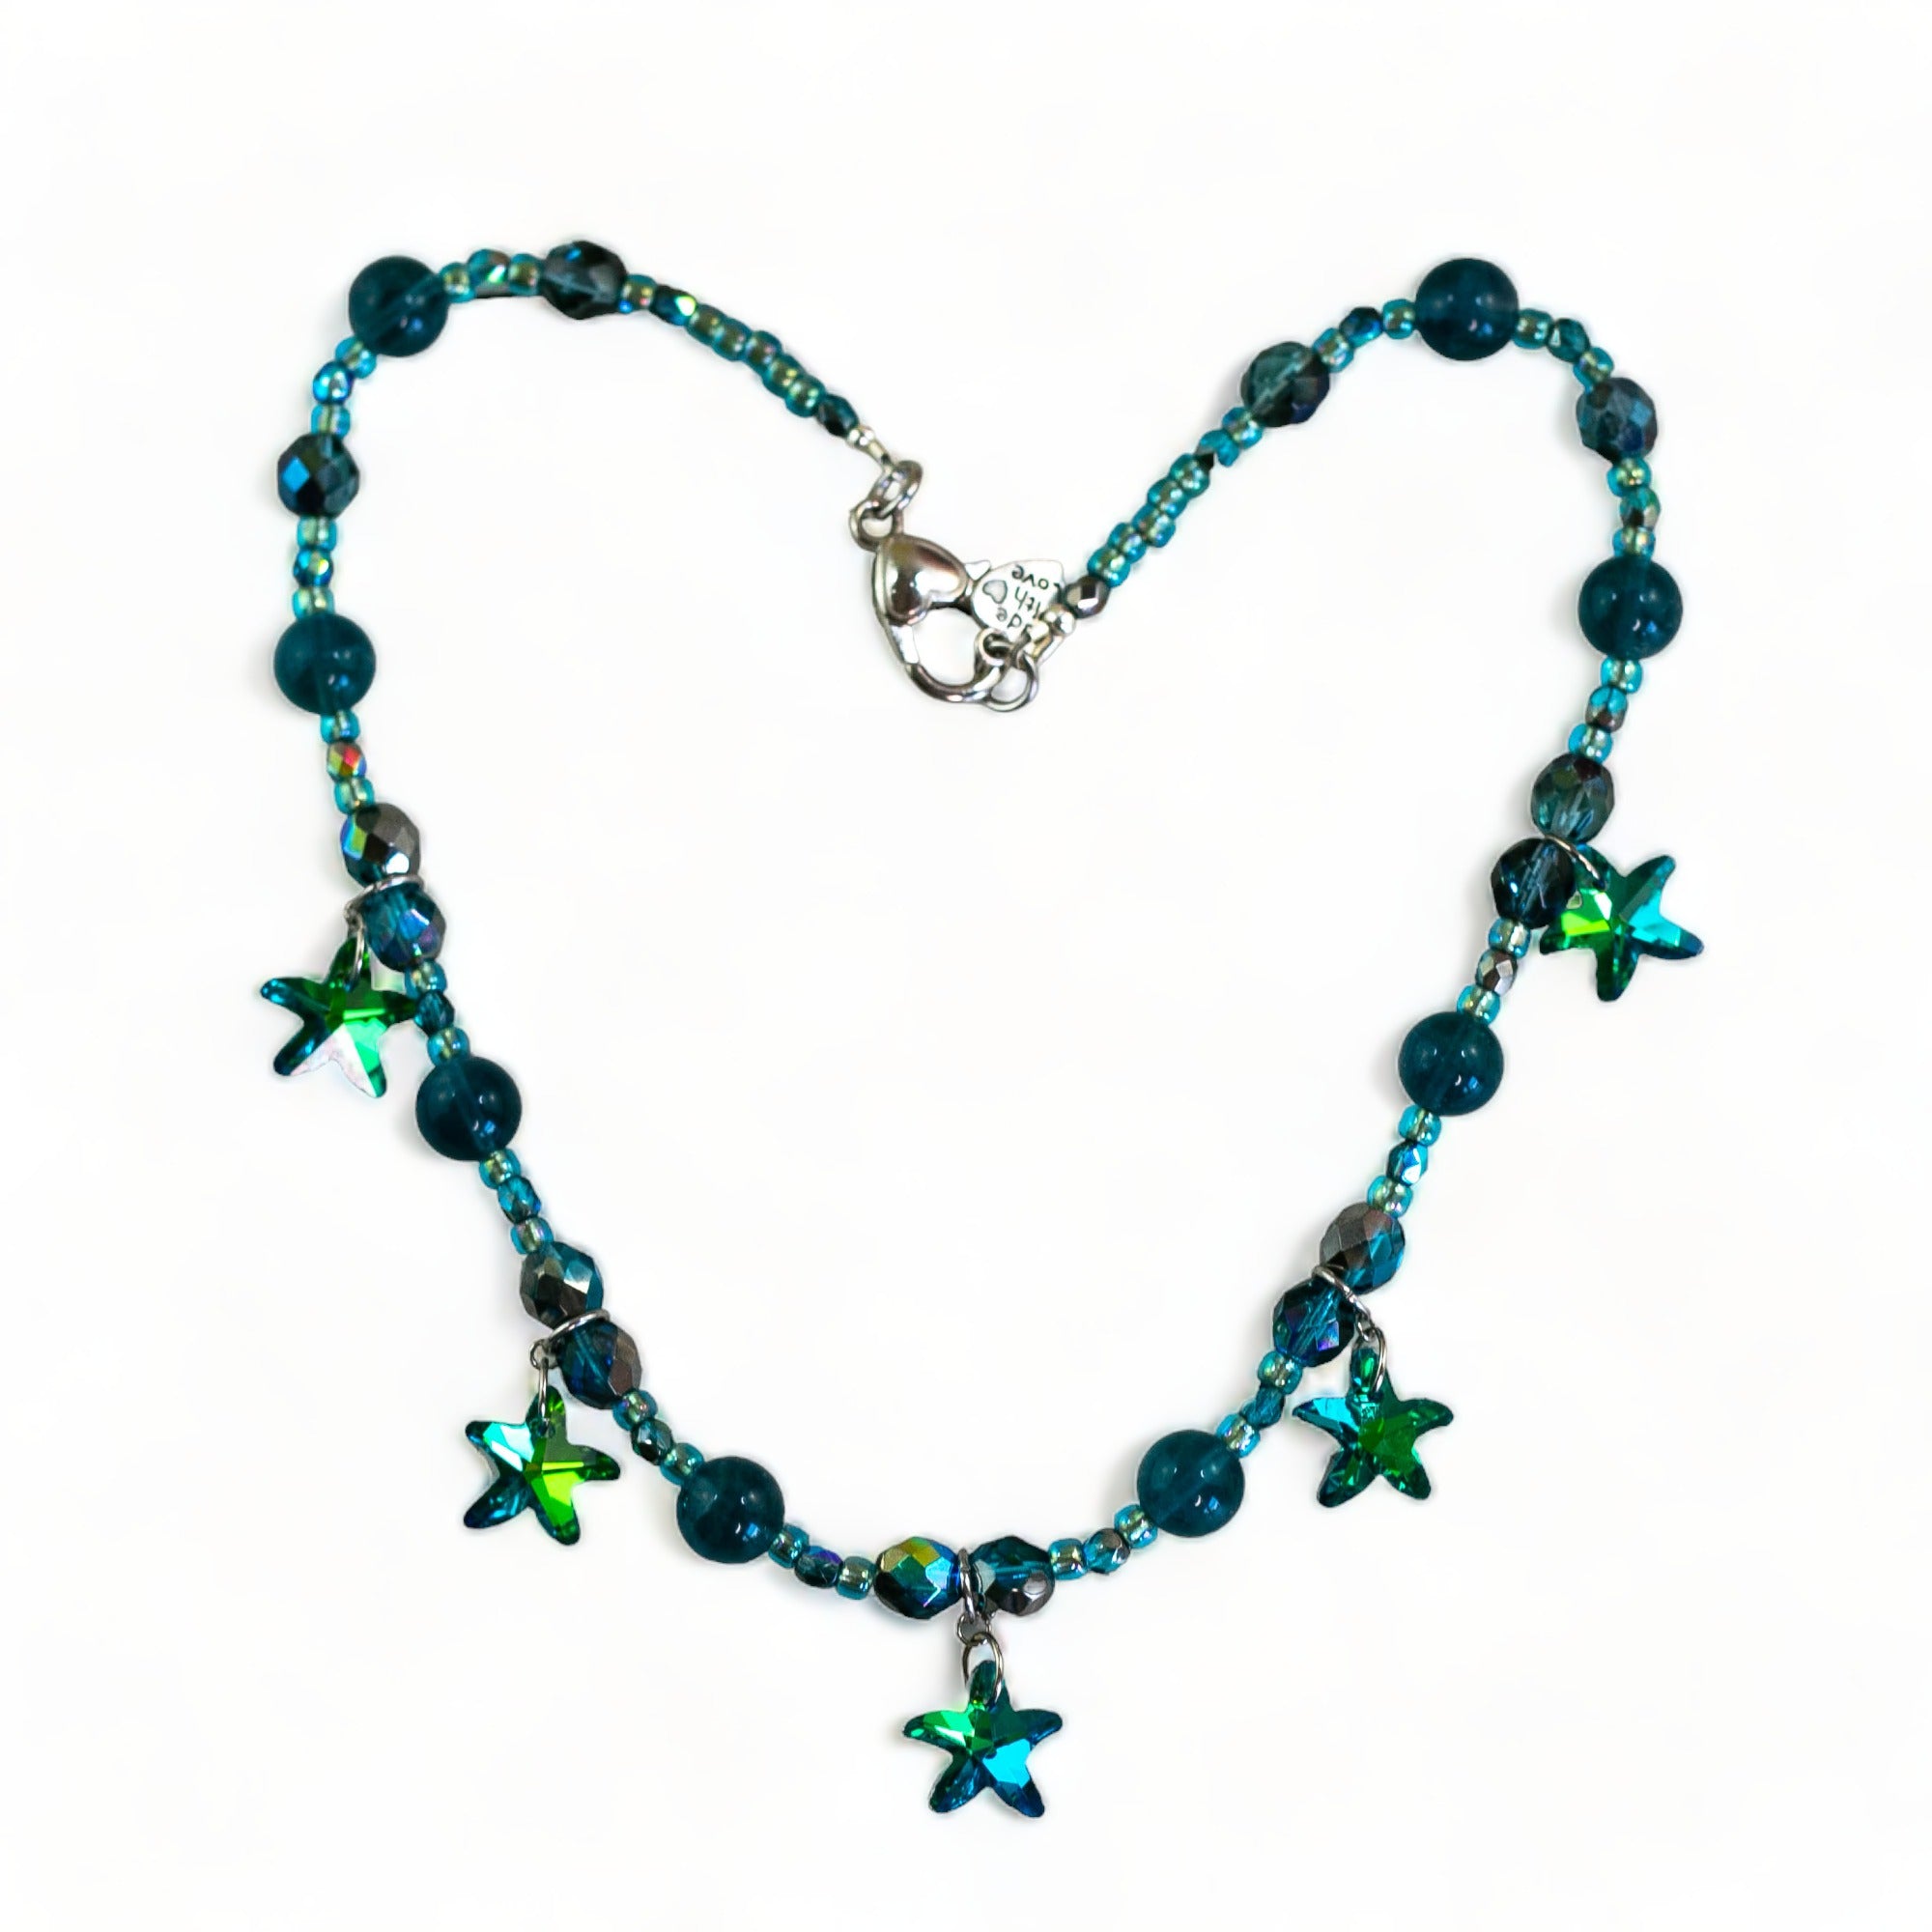 Not All Stars Belong to the Sky, Blue Fluorite and Crystal Starfish Necklace